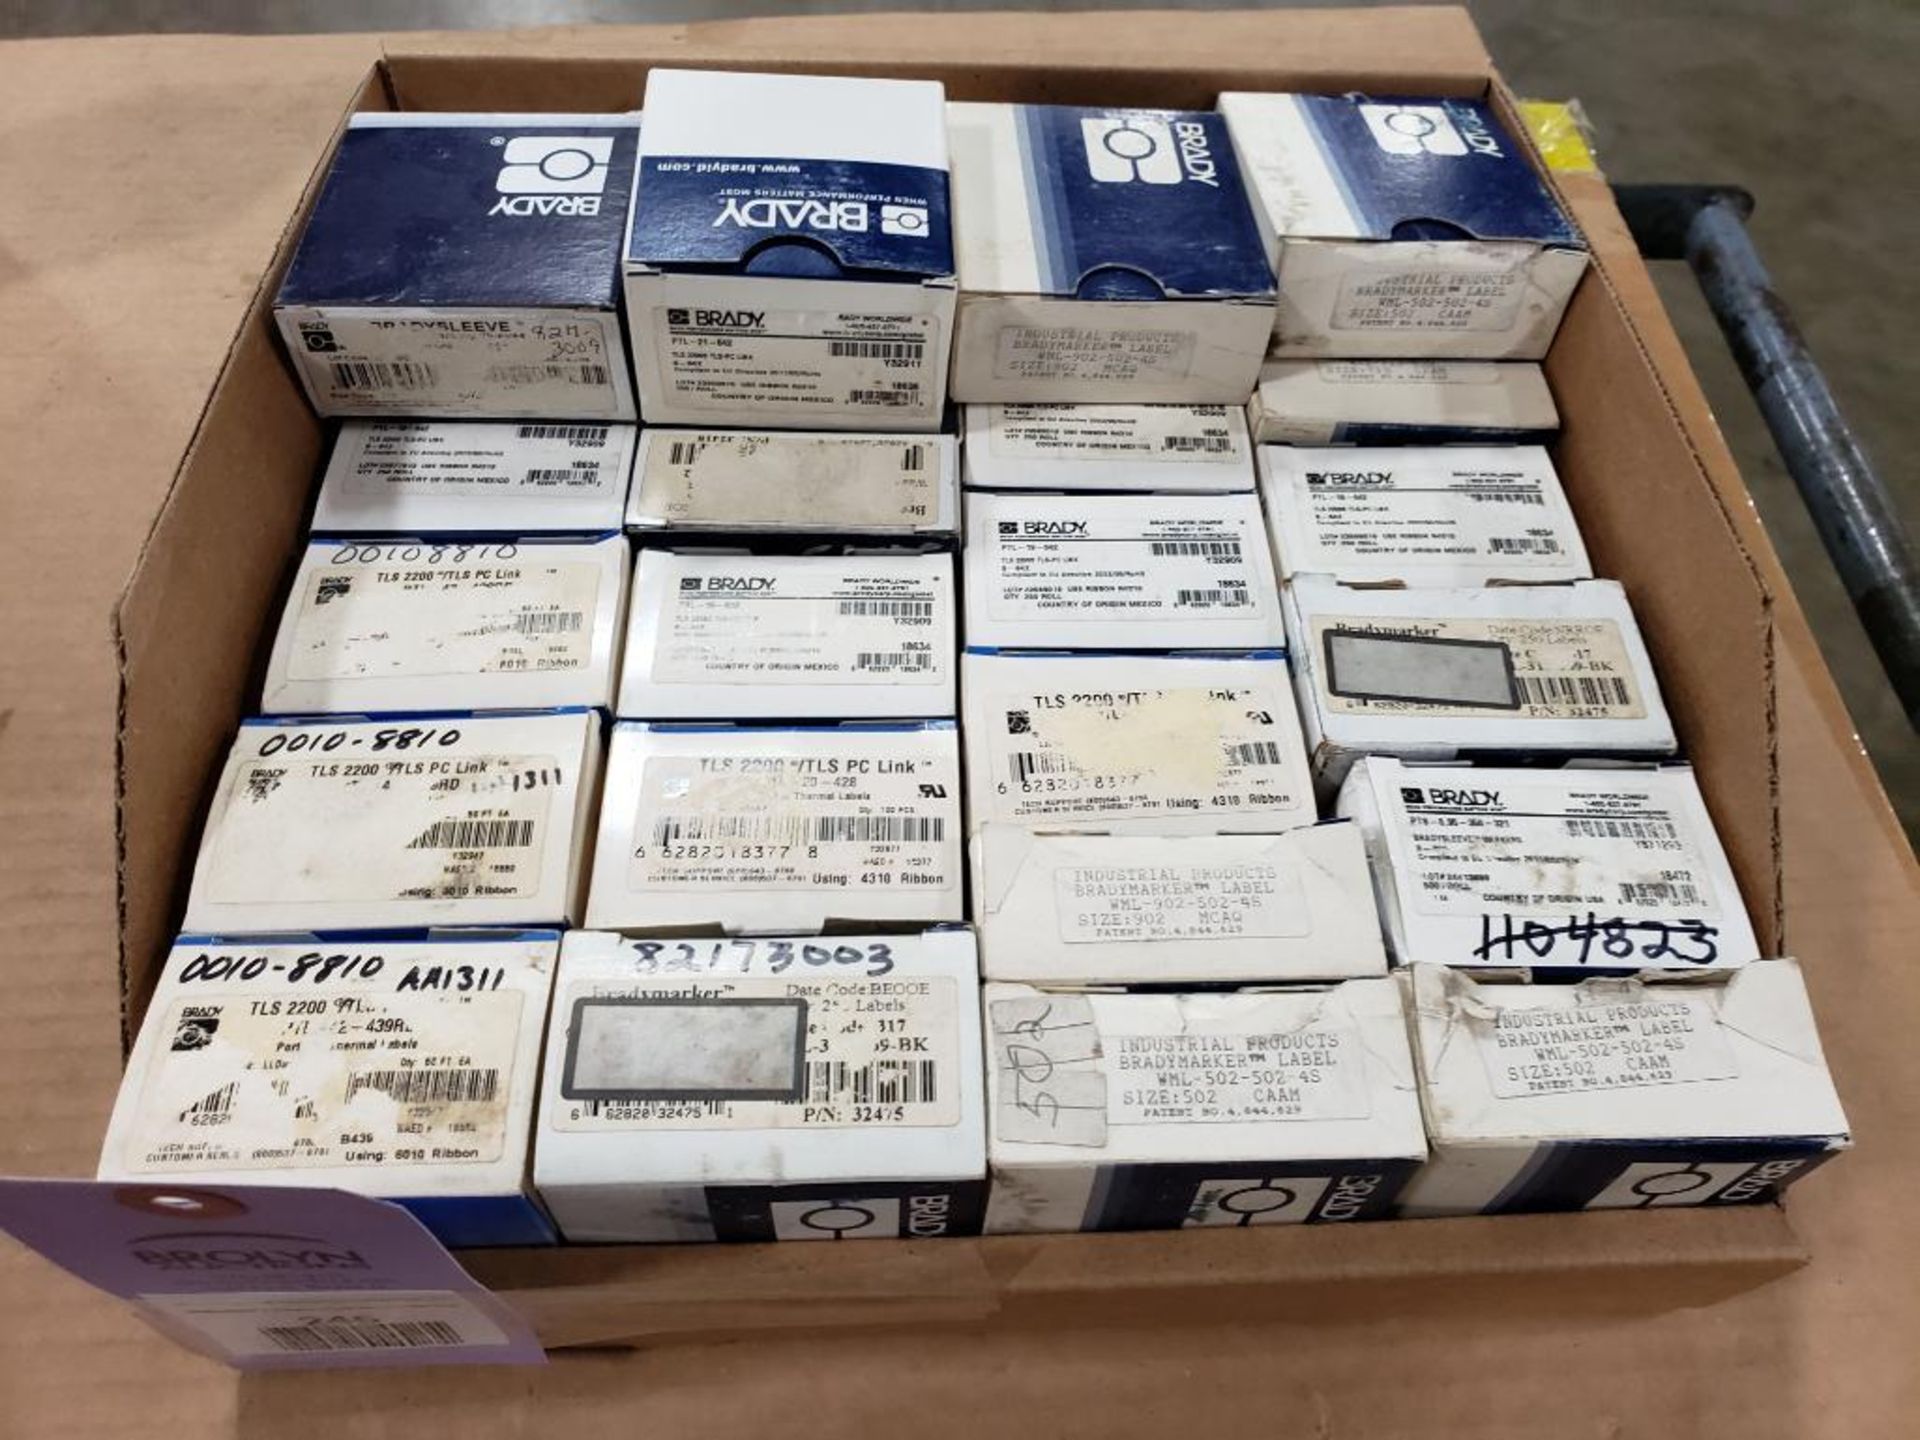 Assorted Brady PTL-21-642 thermal transfer label. New in box.